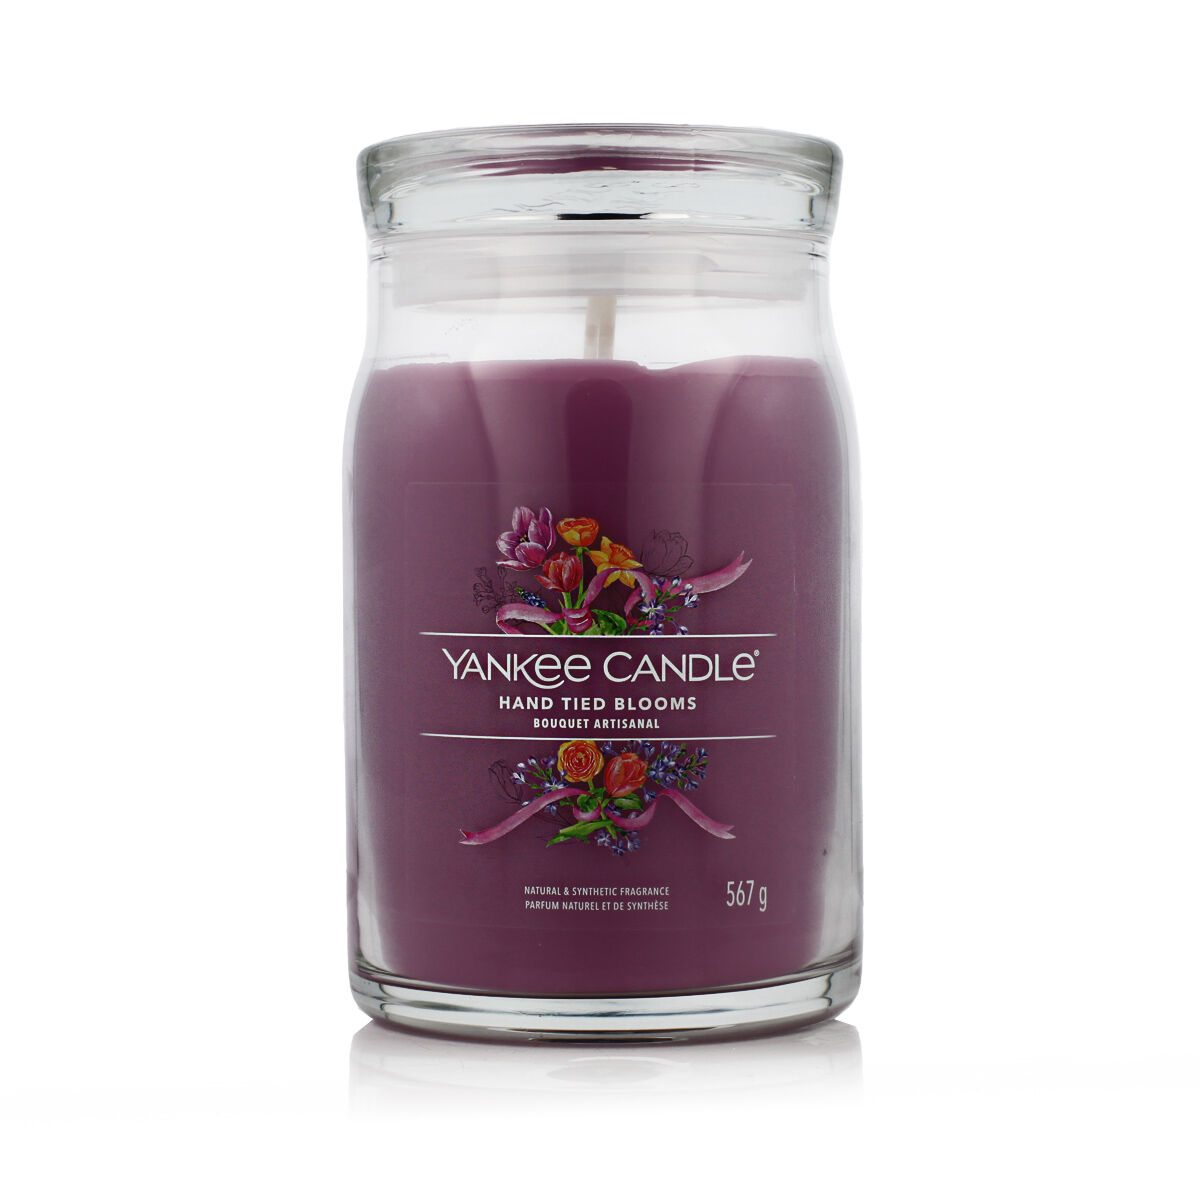 Bougie Parfumée Yankee Candle Hand Tied Blooms 567 g